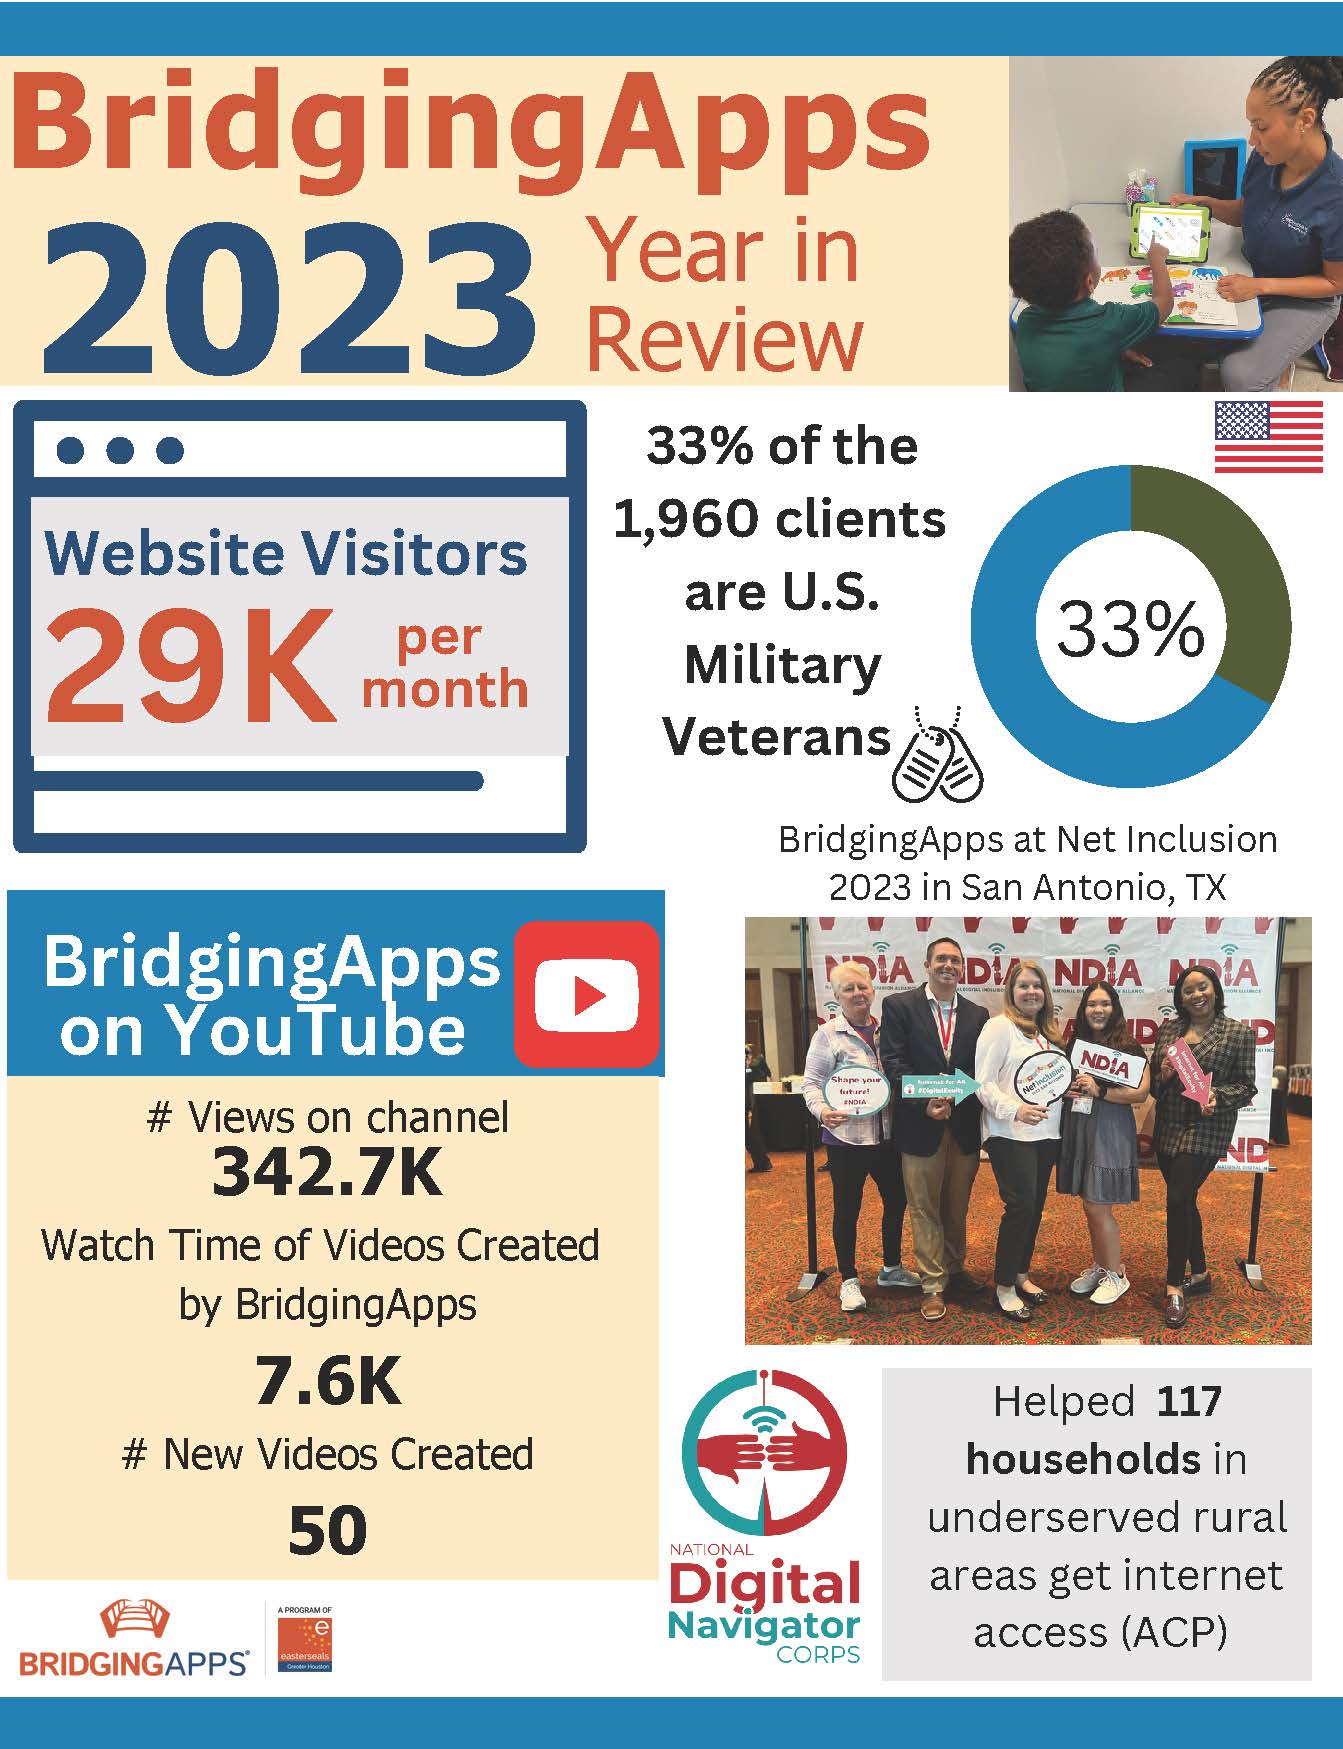 BRIDGINGAPPS Year in Review 2023 (1)_Page_1